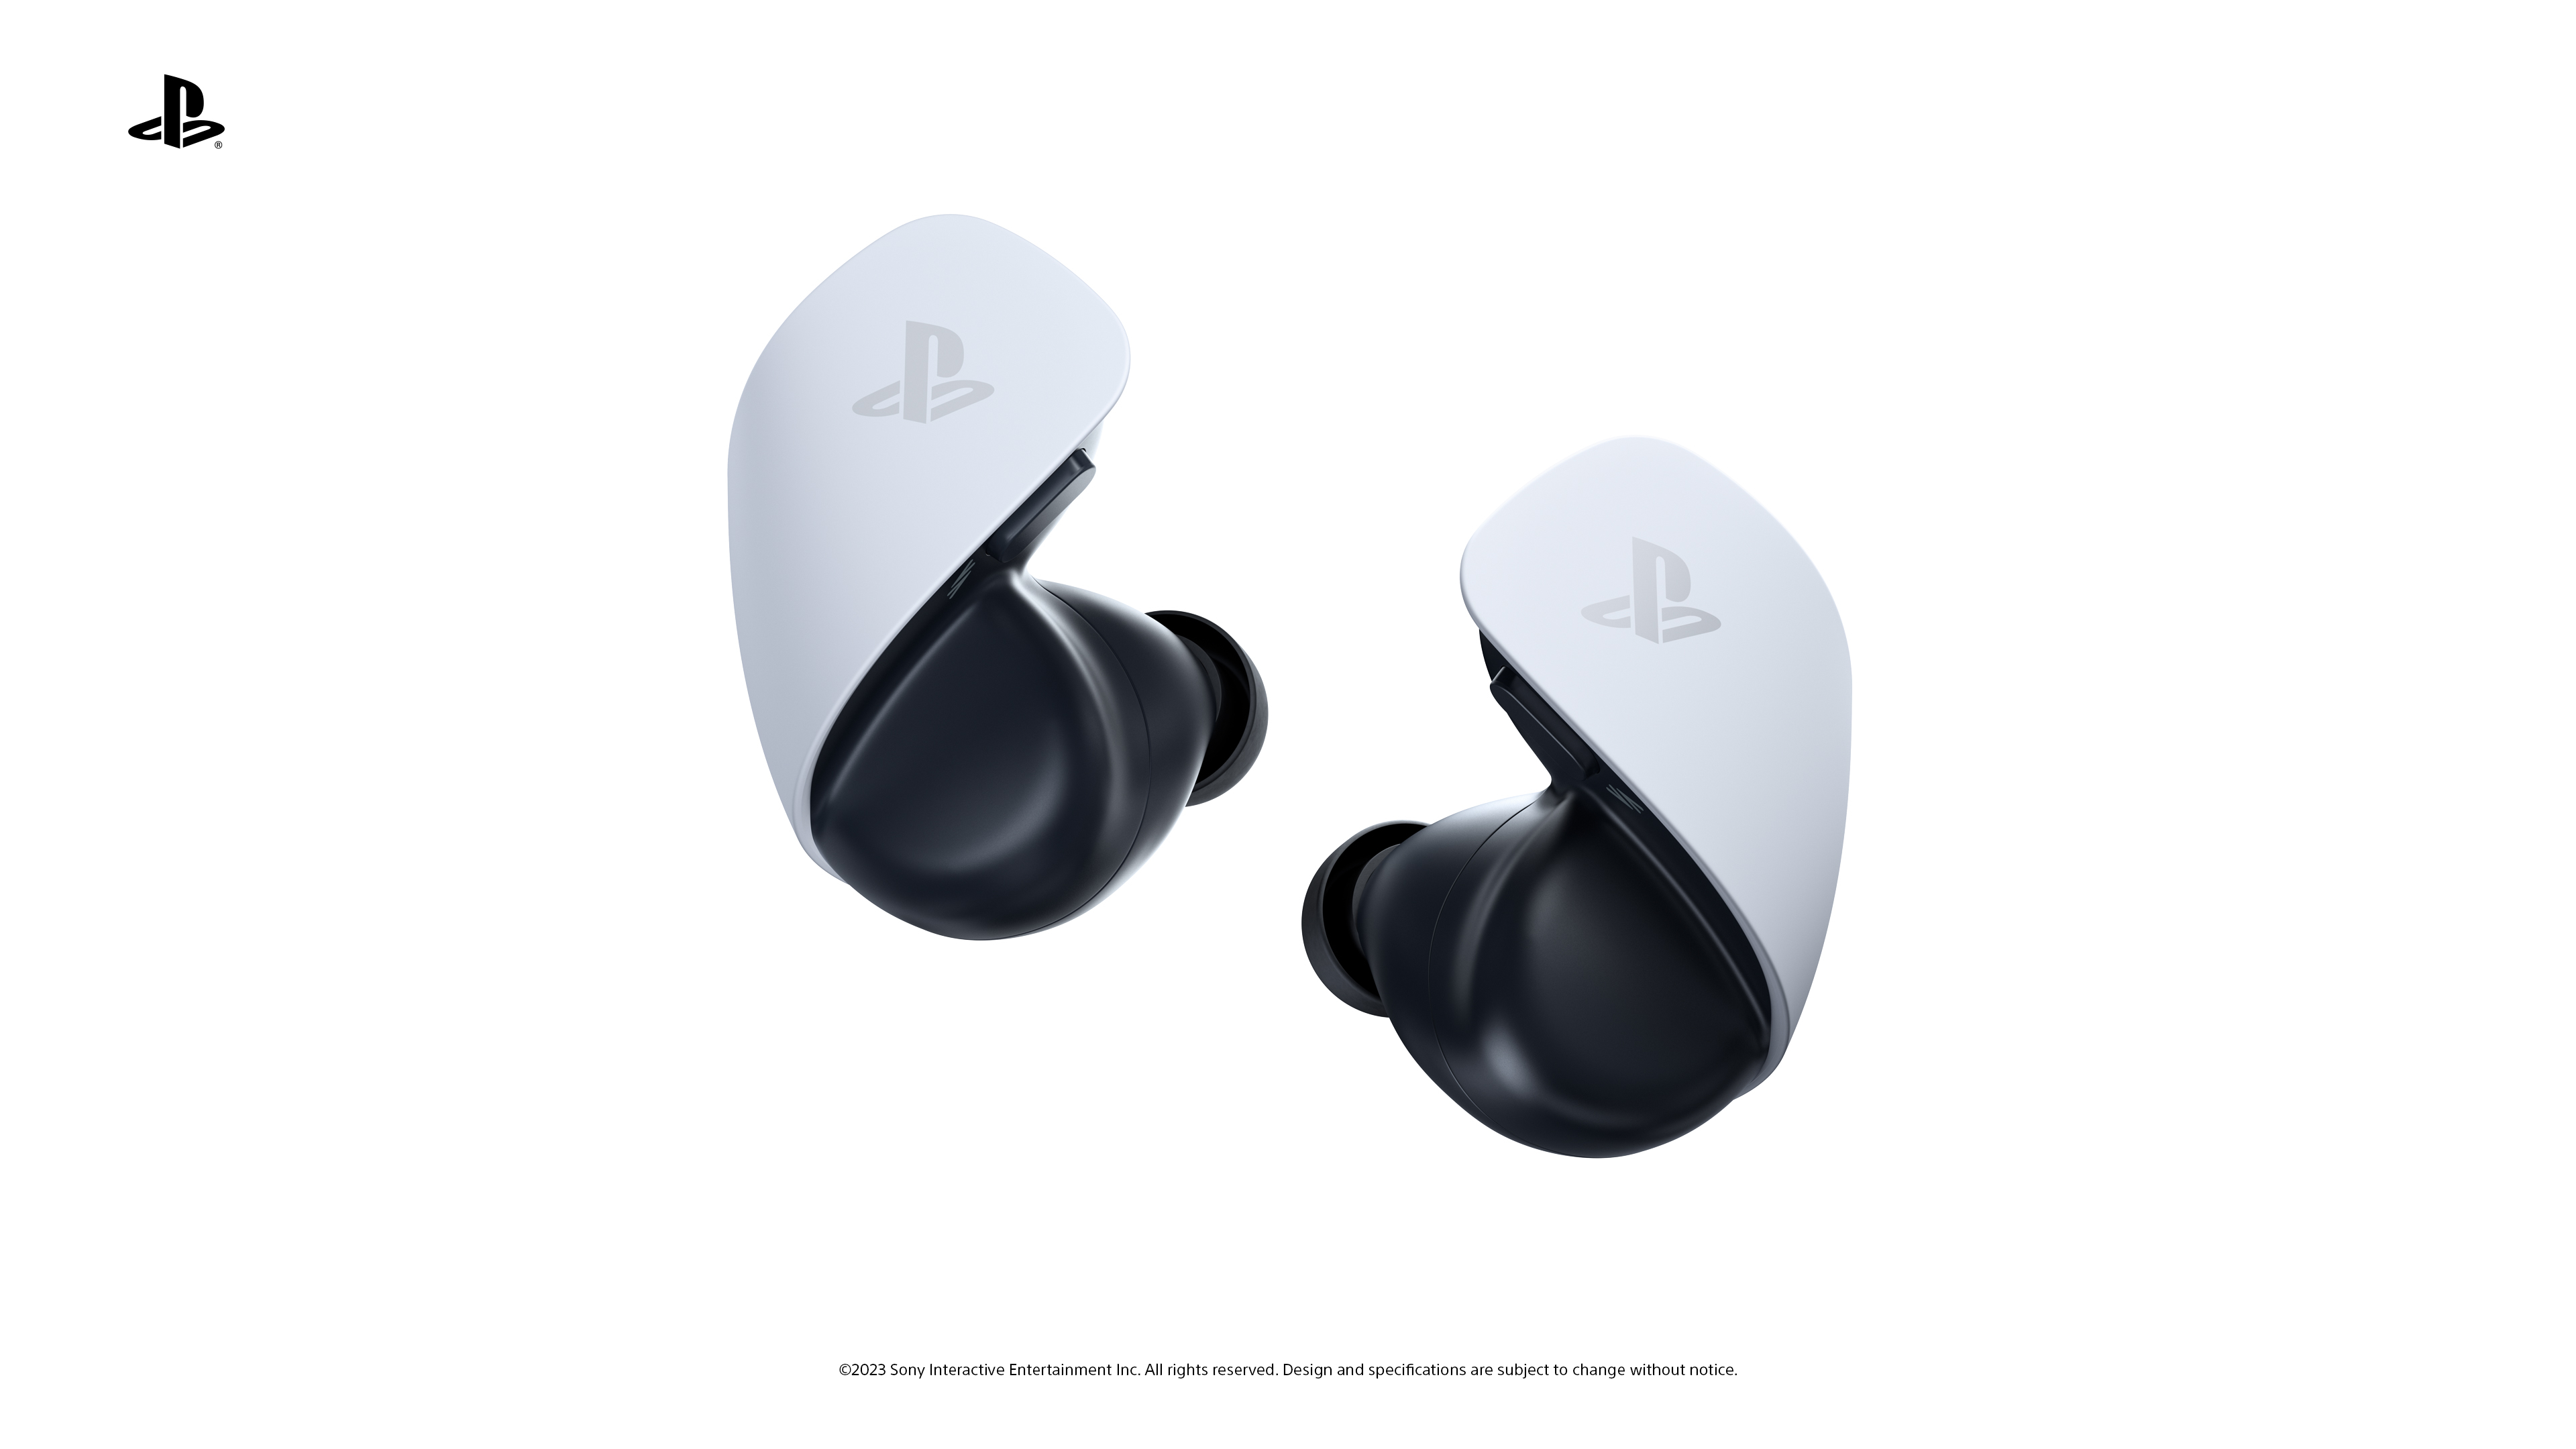 Sony's duo of new wireless headphones could offer audiophile quality for PS5  gamers